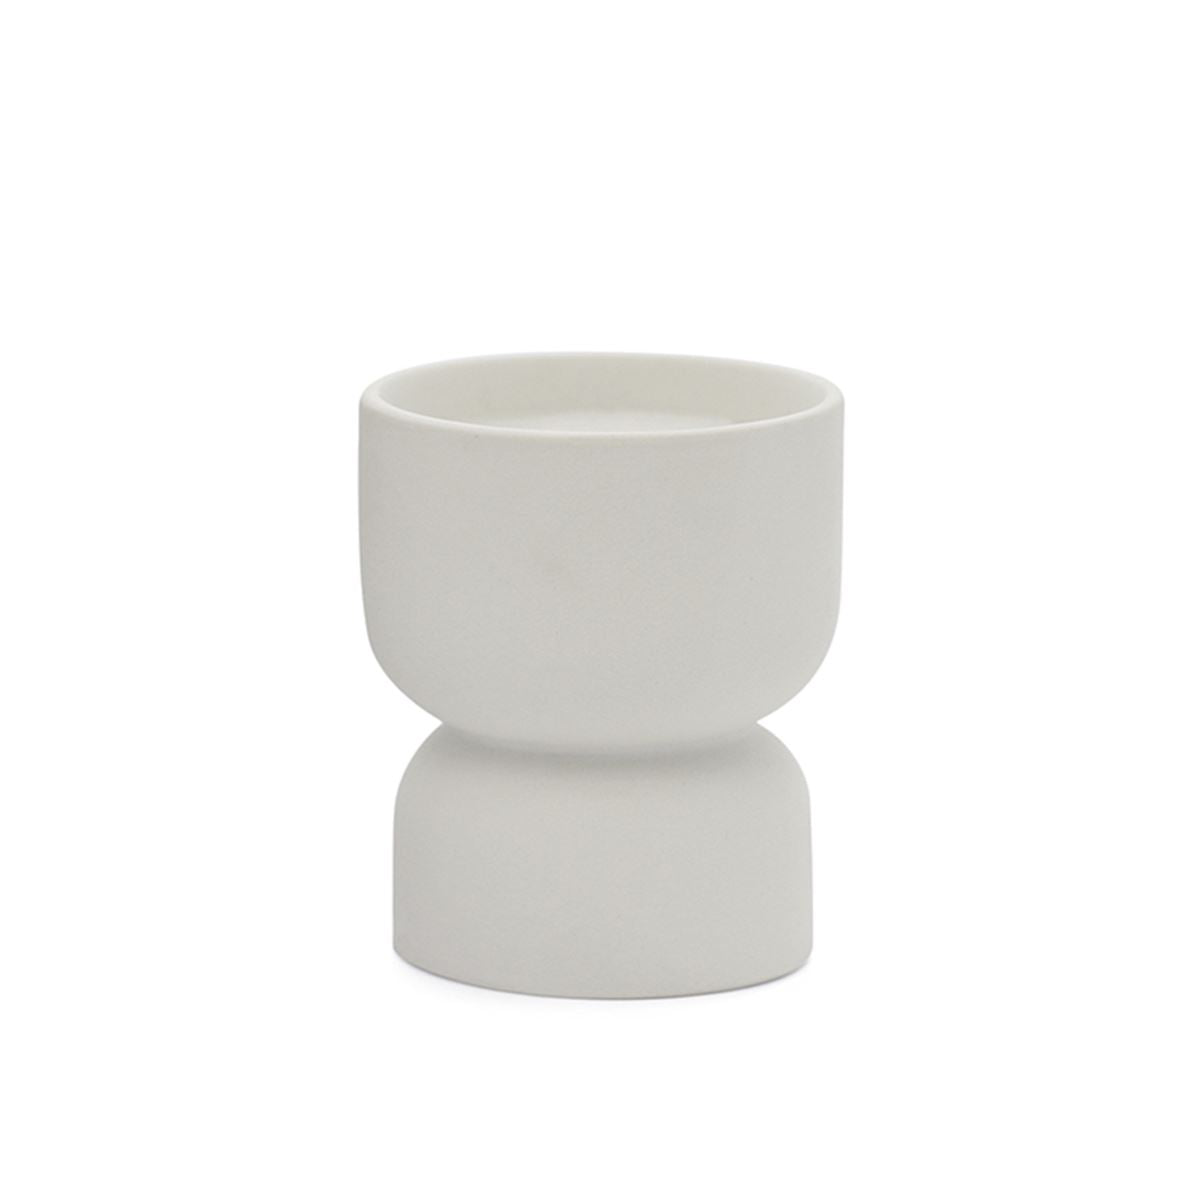 FORM - TOBACCO FLOWER SOY CANDLE - Sullivan Street Tea & Spice Company